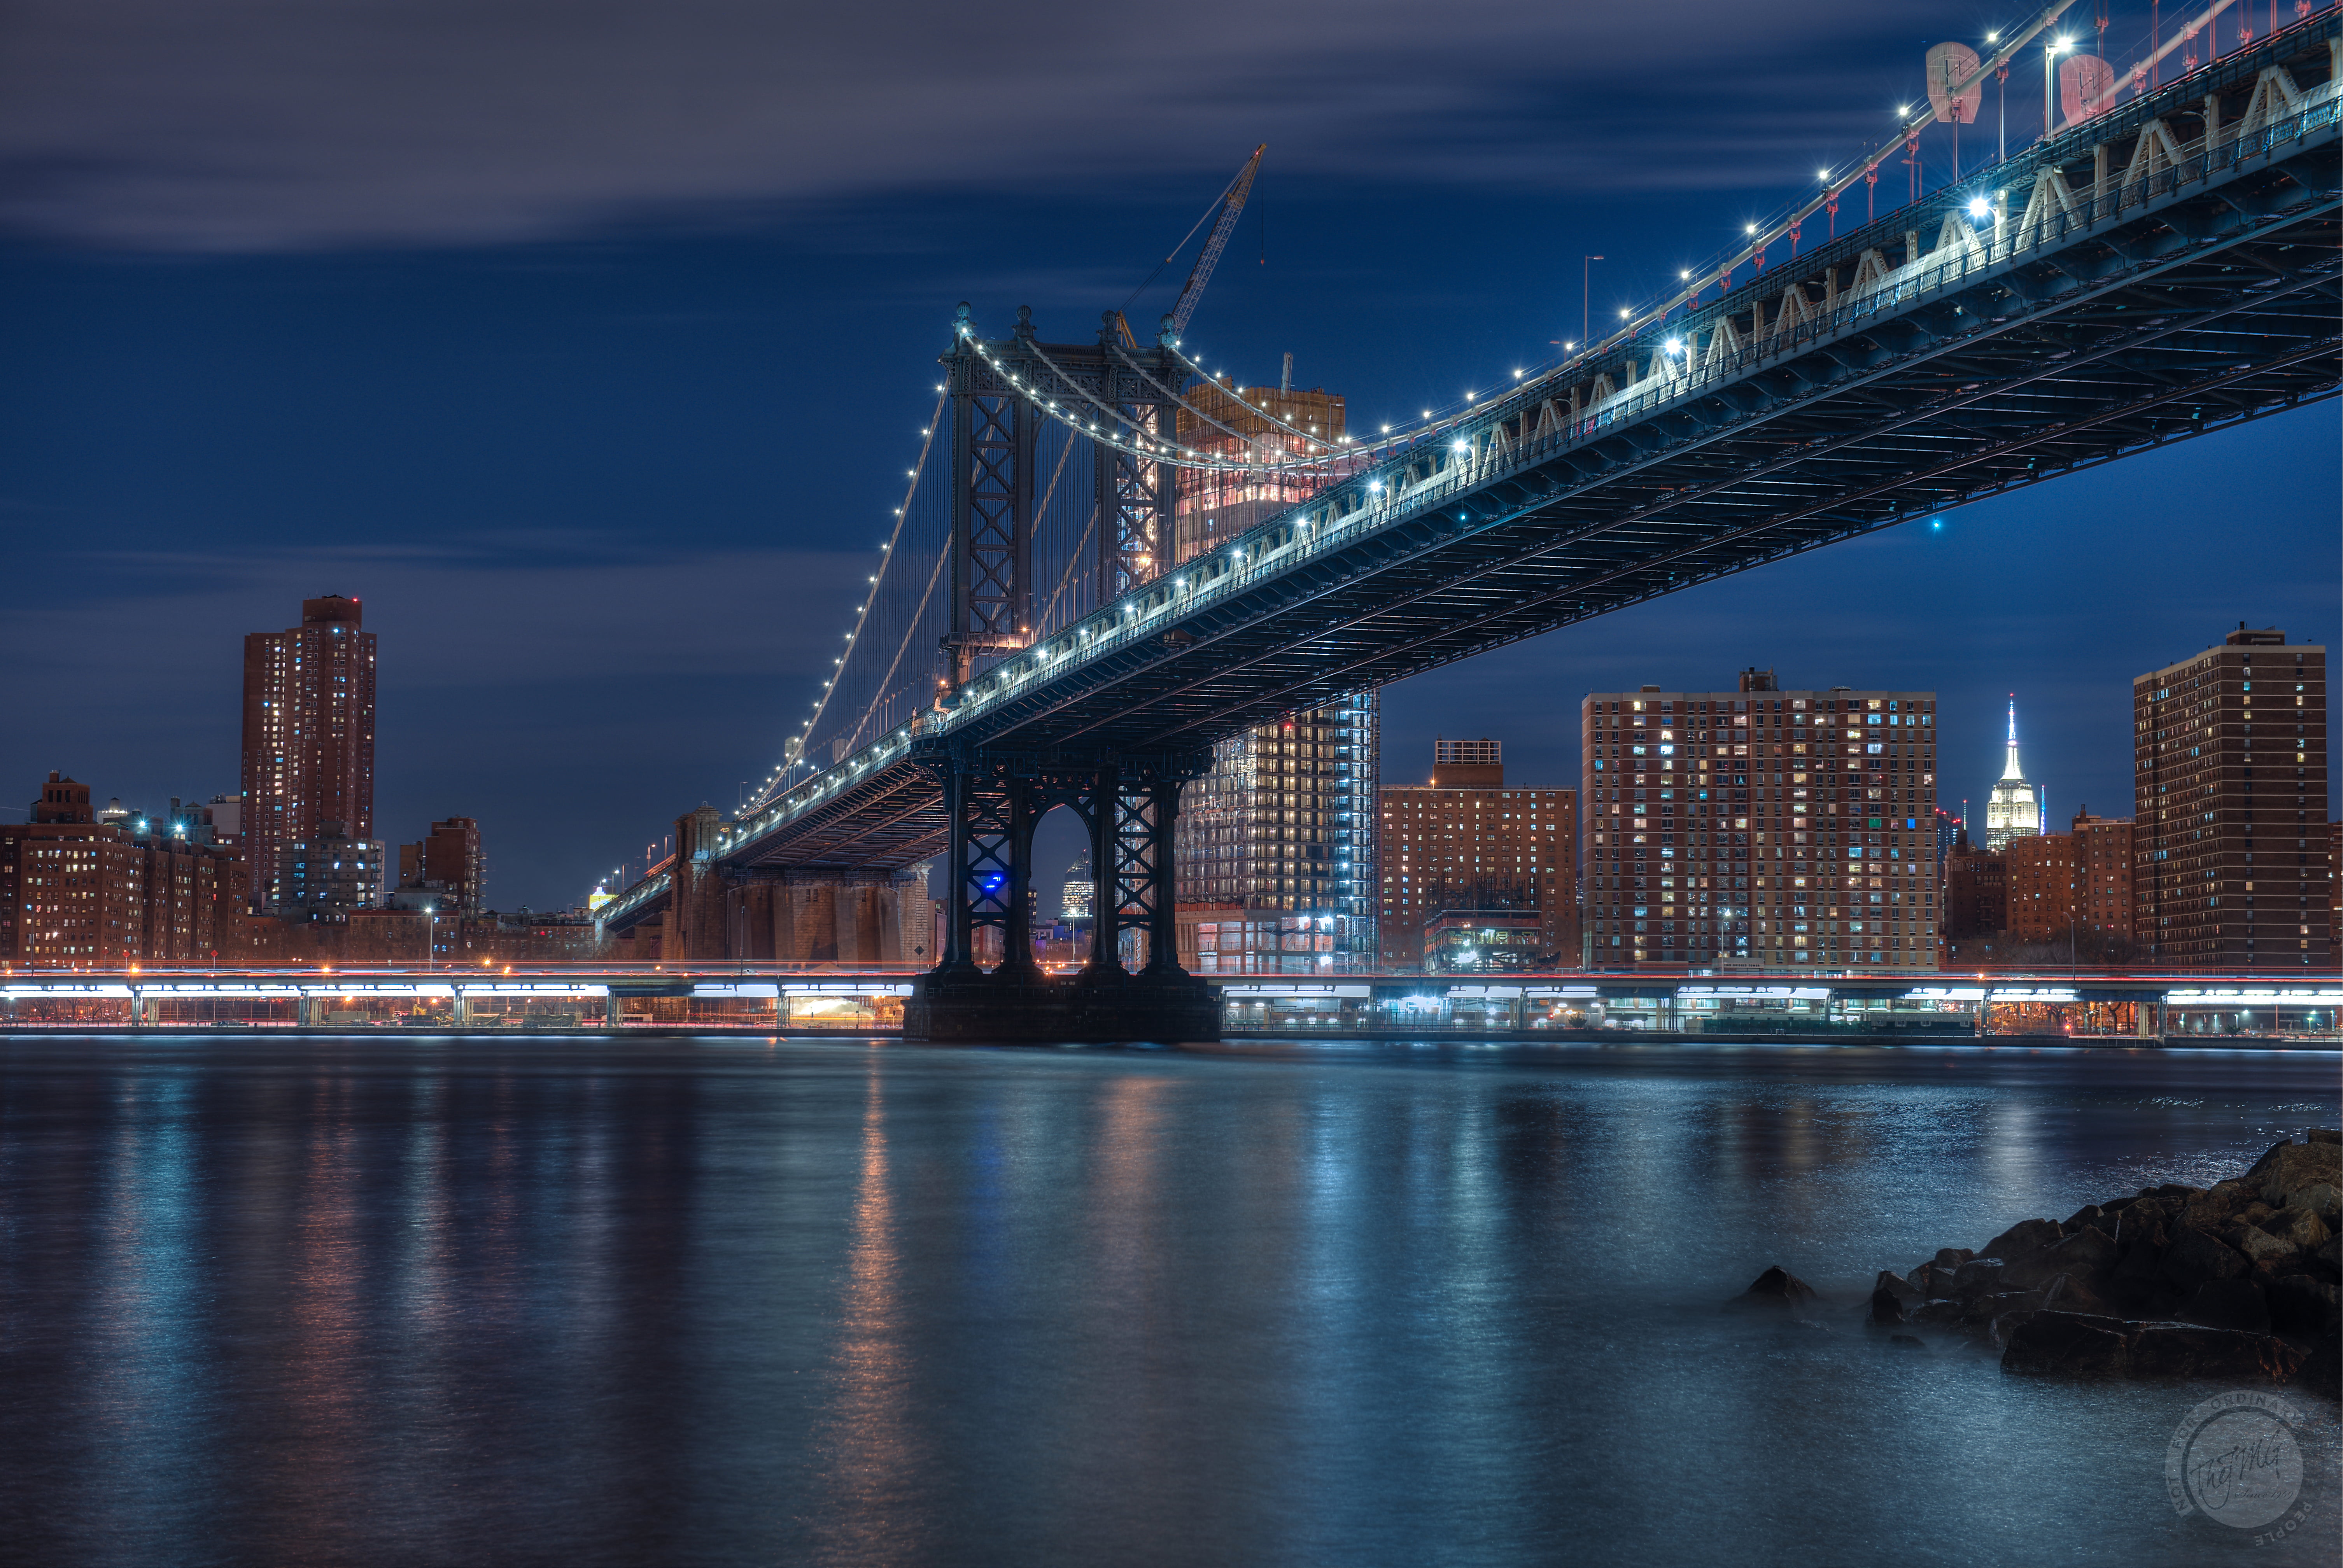 painting of Manhattan Bridge with lights during nighttime